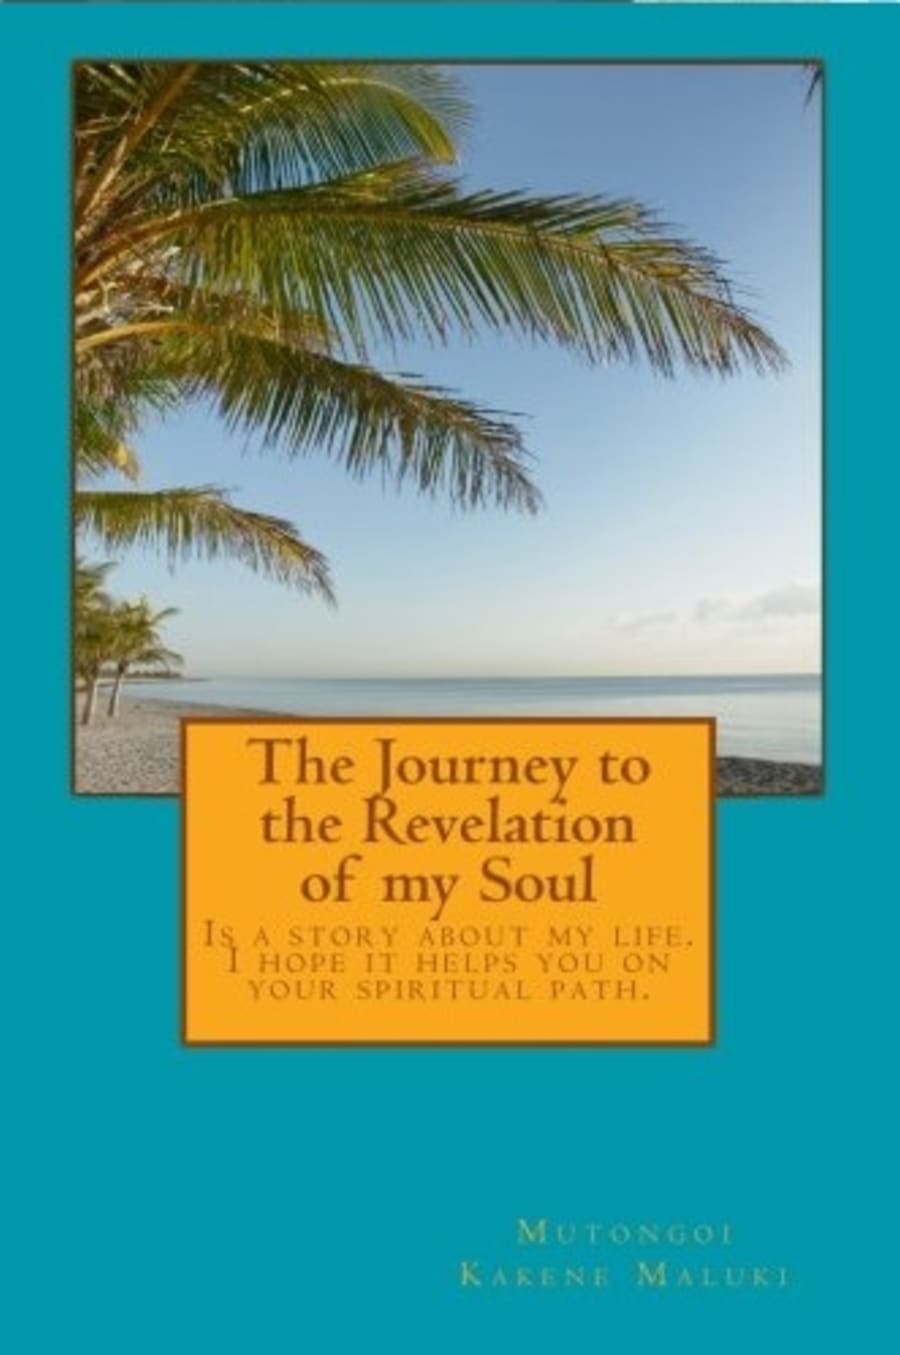 The Journey to the Revelation of my Soul